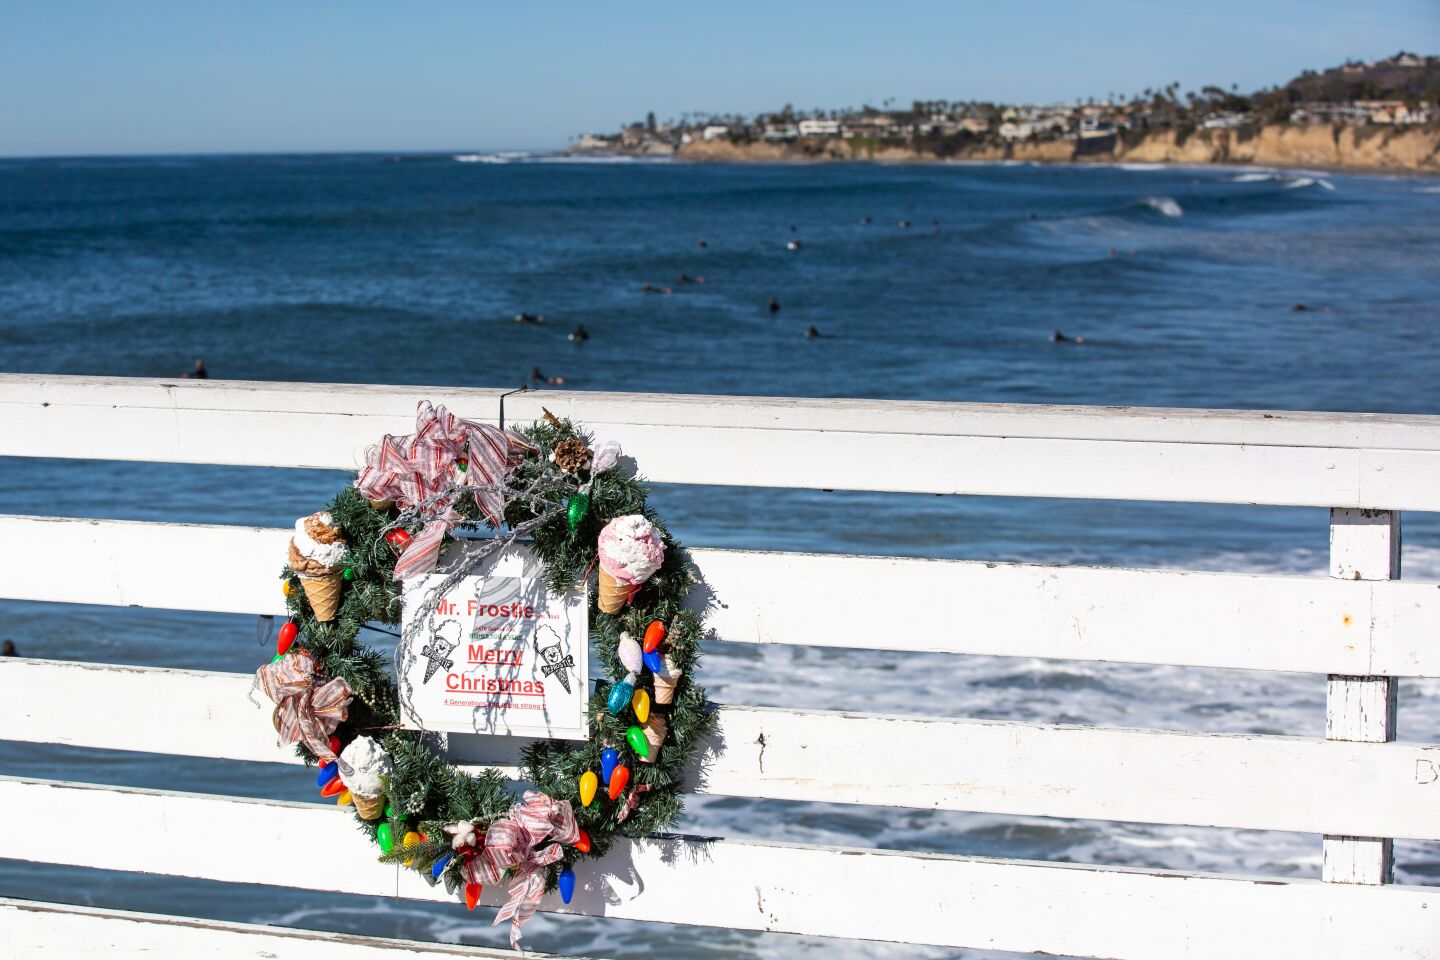 A Mr. Frostie wreath is one of more than 30 Christmas wreaths lining Crystal Pier in Pacific Beach. Discover Pacific Beach, the business improvement district, hopes the wreaths will provide local businesses with more exposure.